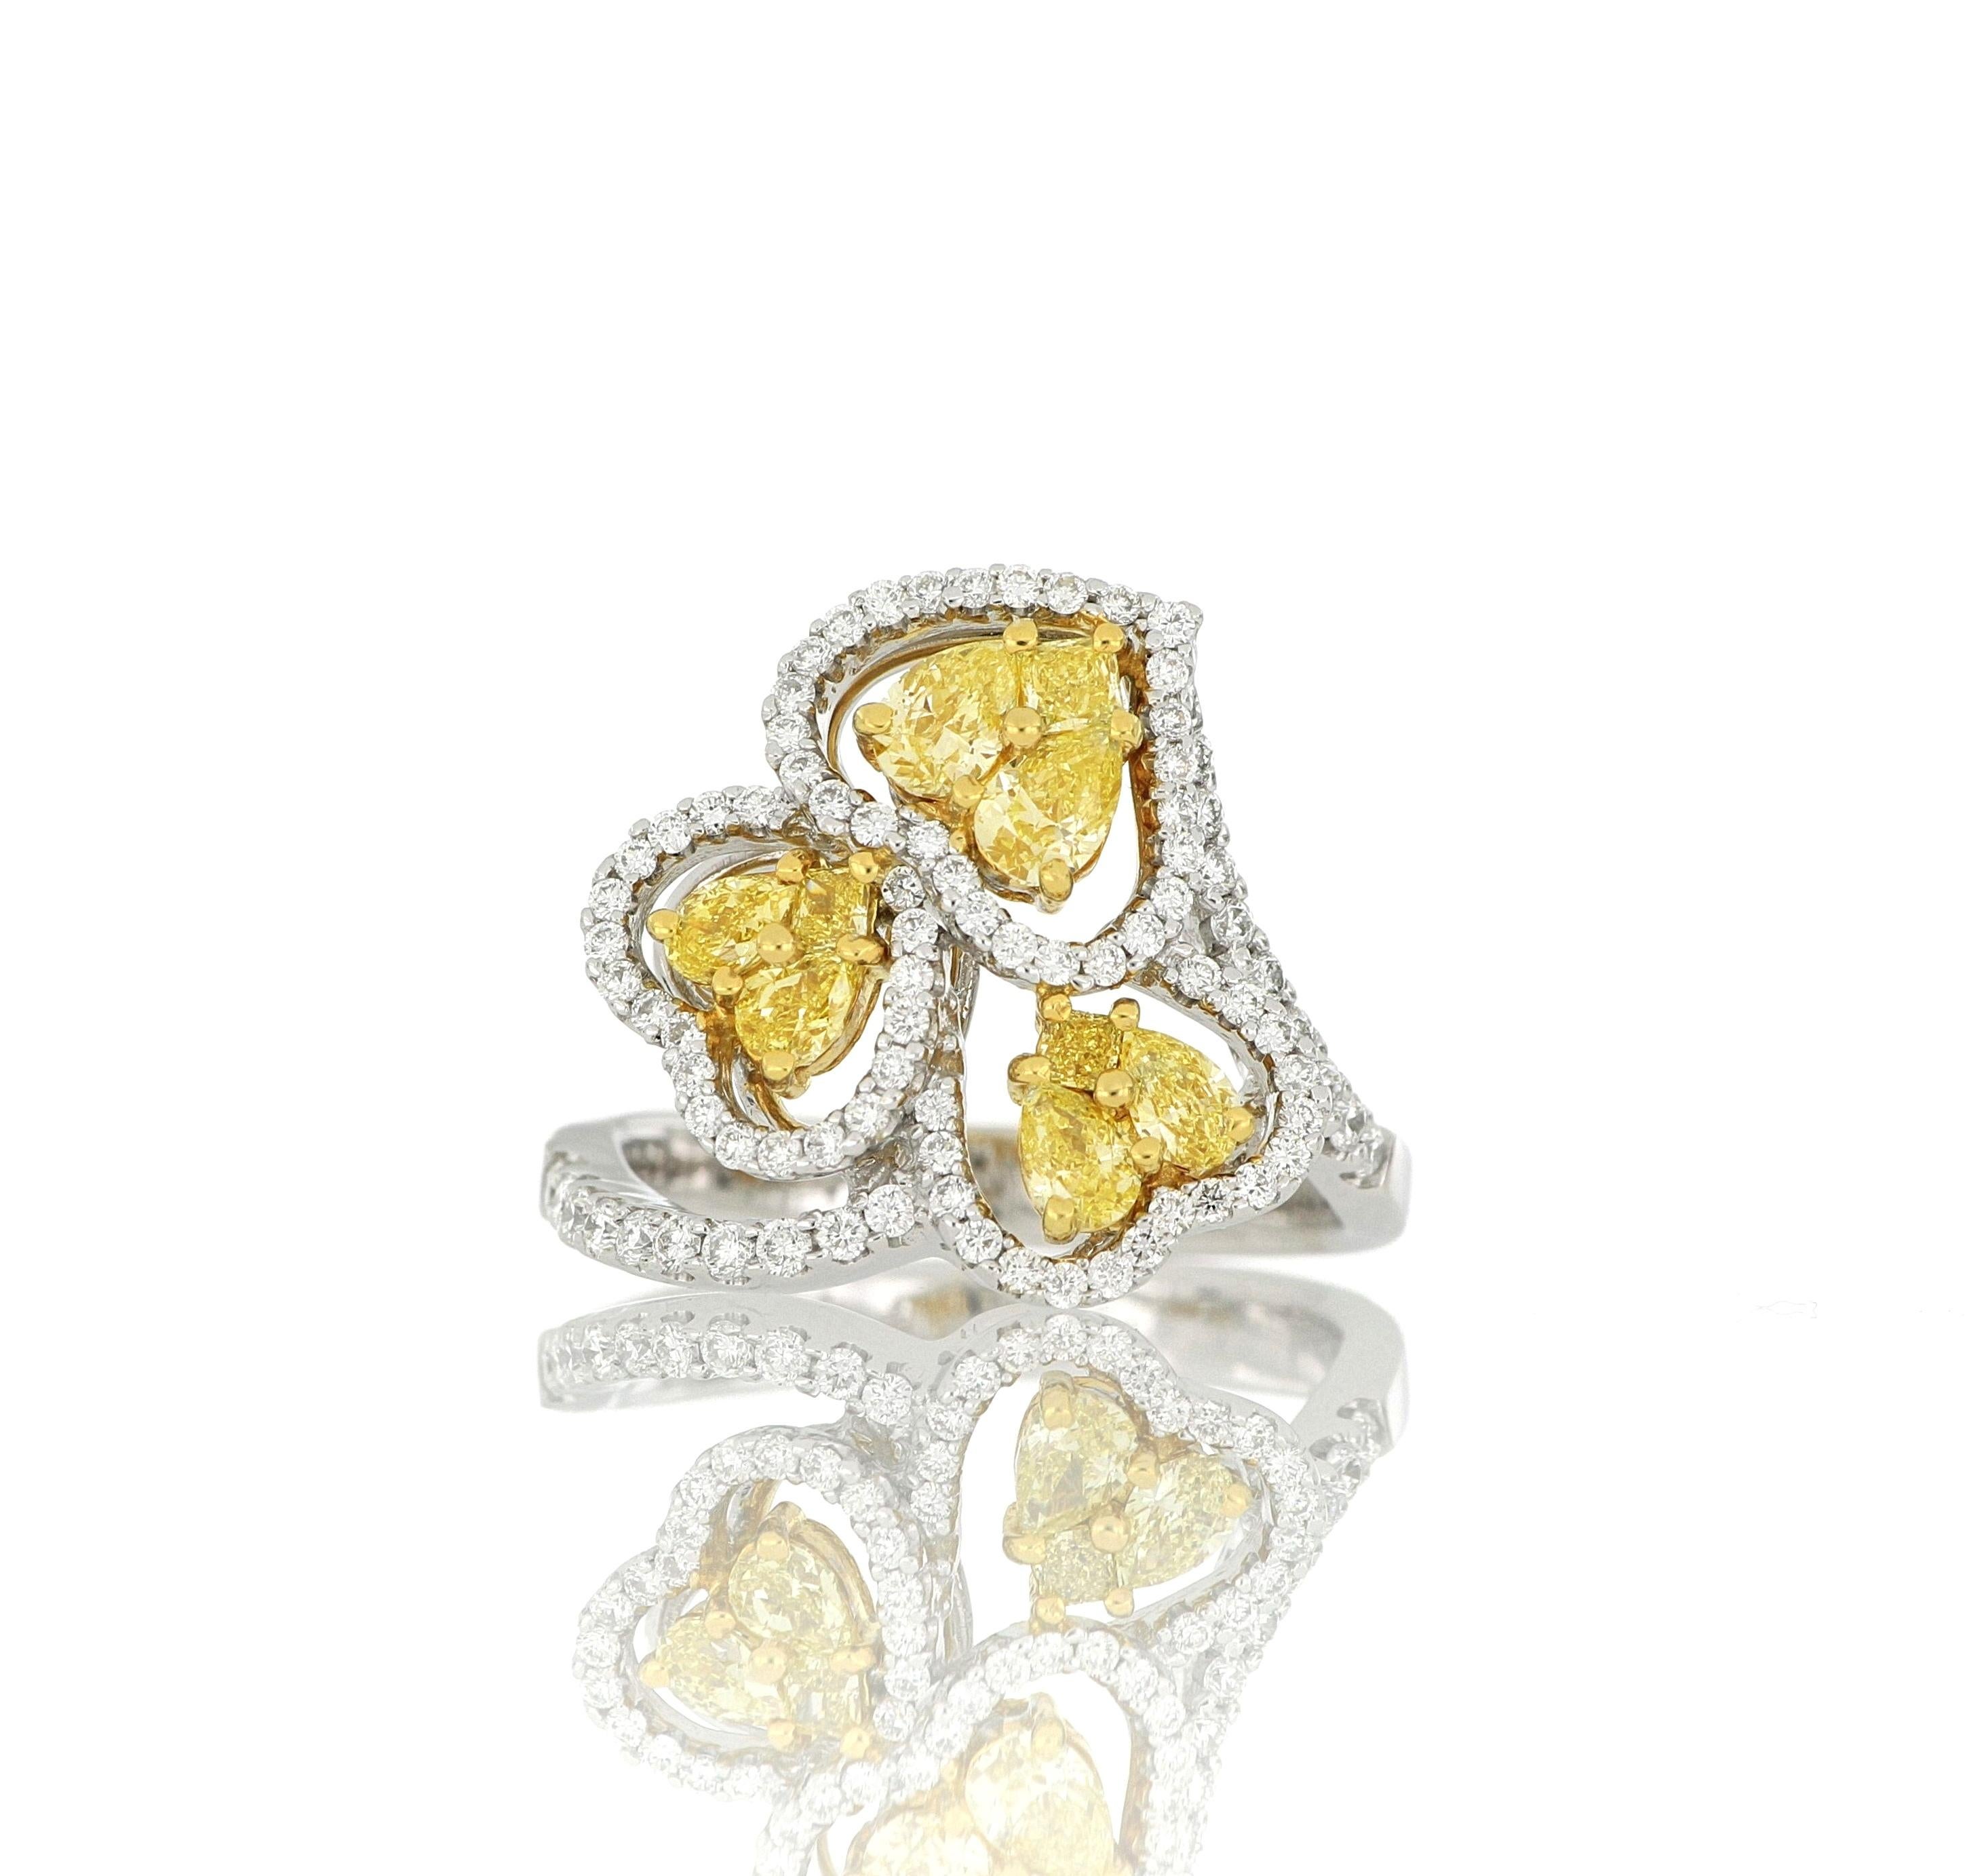 A natural yellow diamond ring, set with bright Fancy yellow to Fancy Intense yellow diamonds weighing approximately 0.86 carats in 3 clusters of heart shape, surrounded by brilliant-cut white diamonds weighing approximately 0.90 carats, mounted in